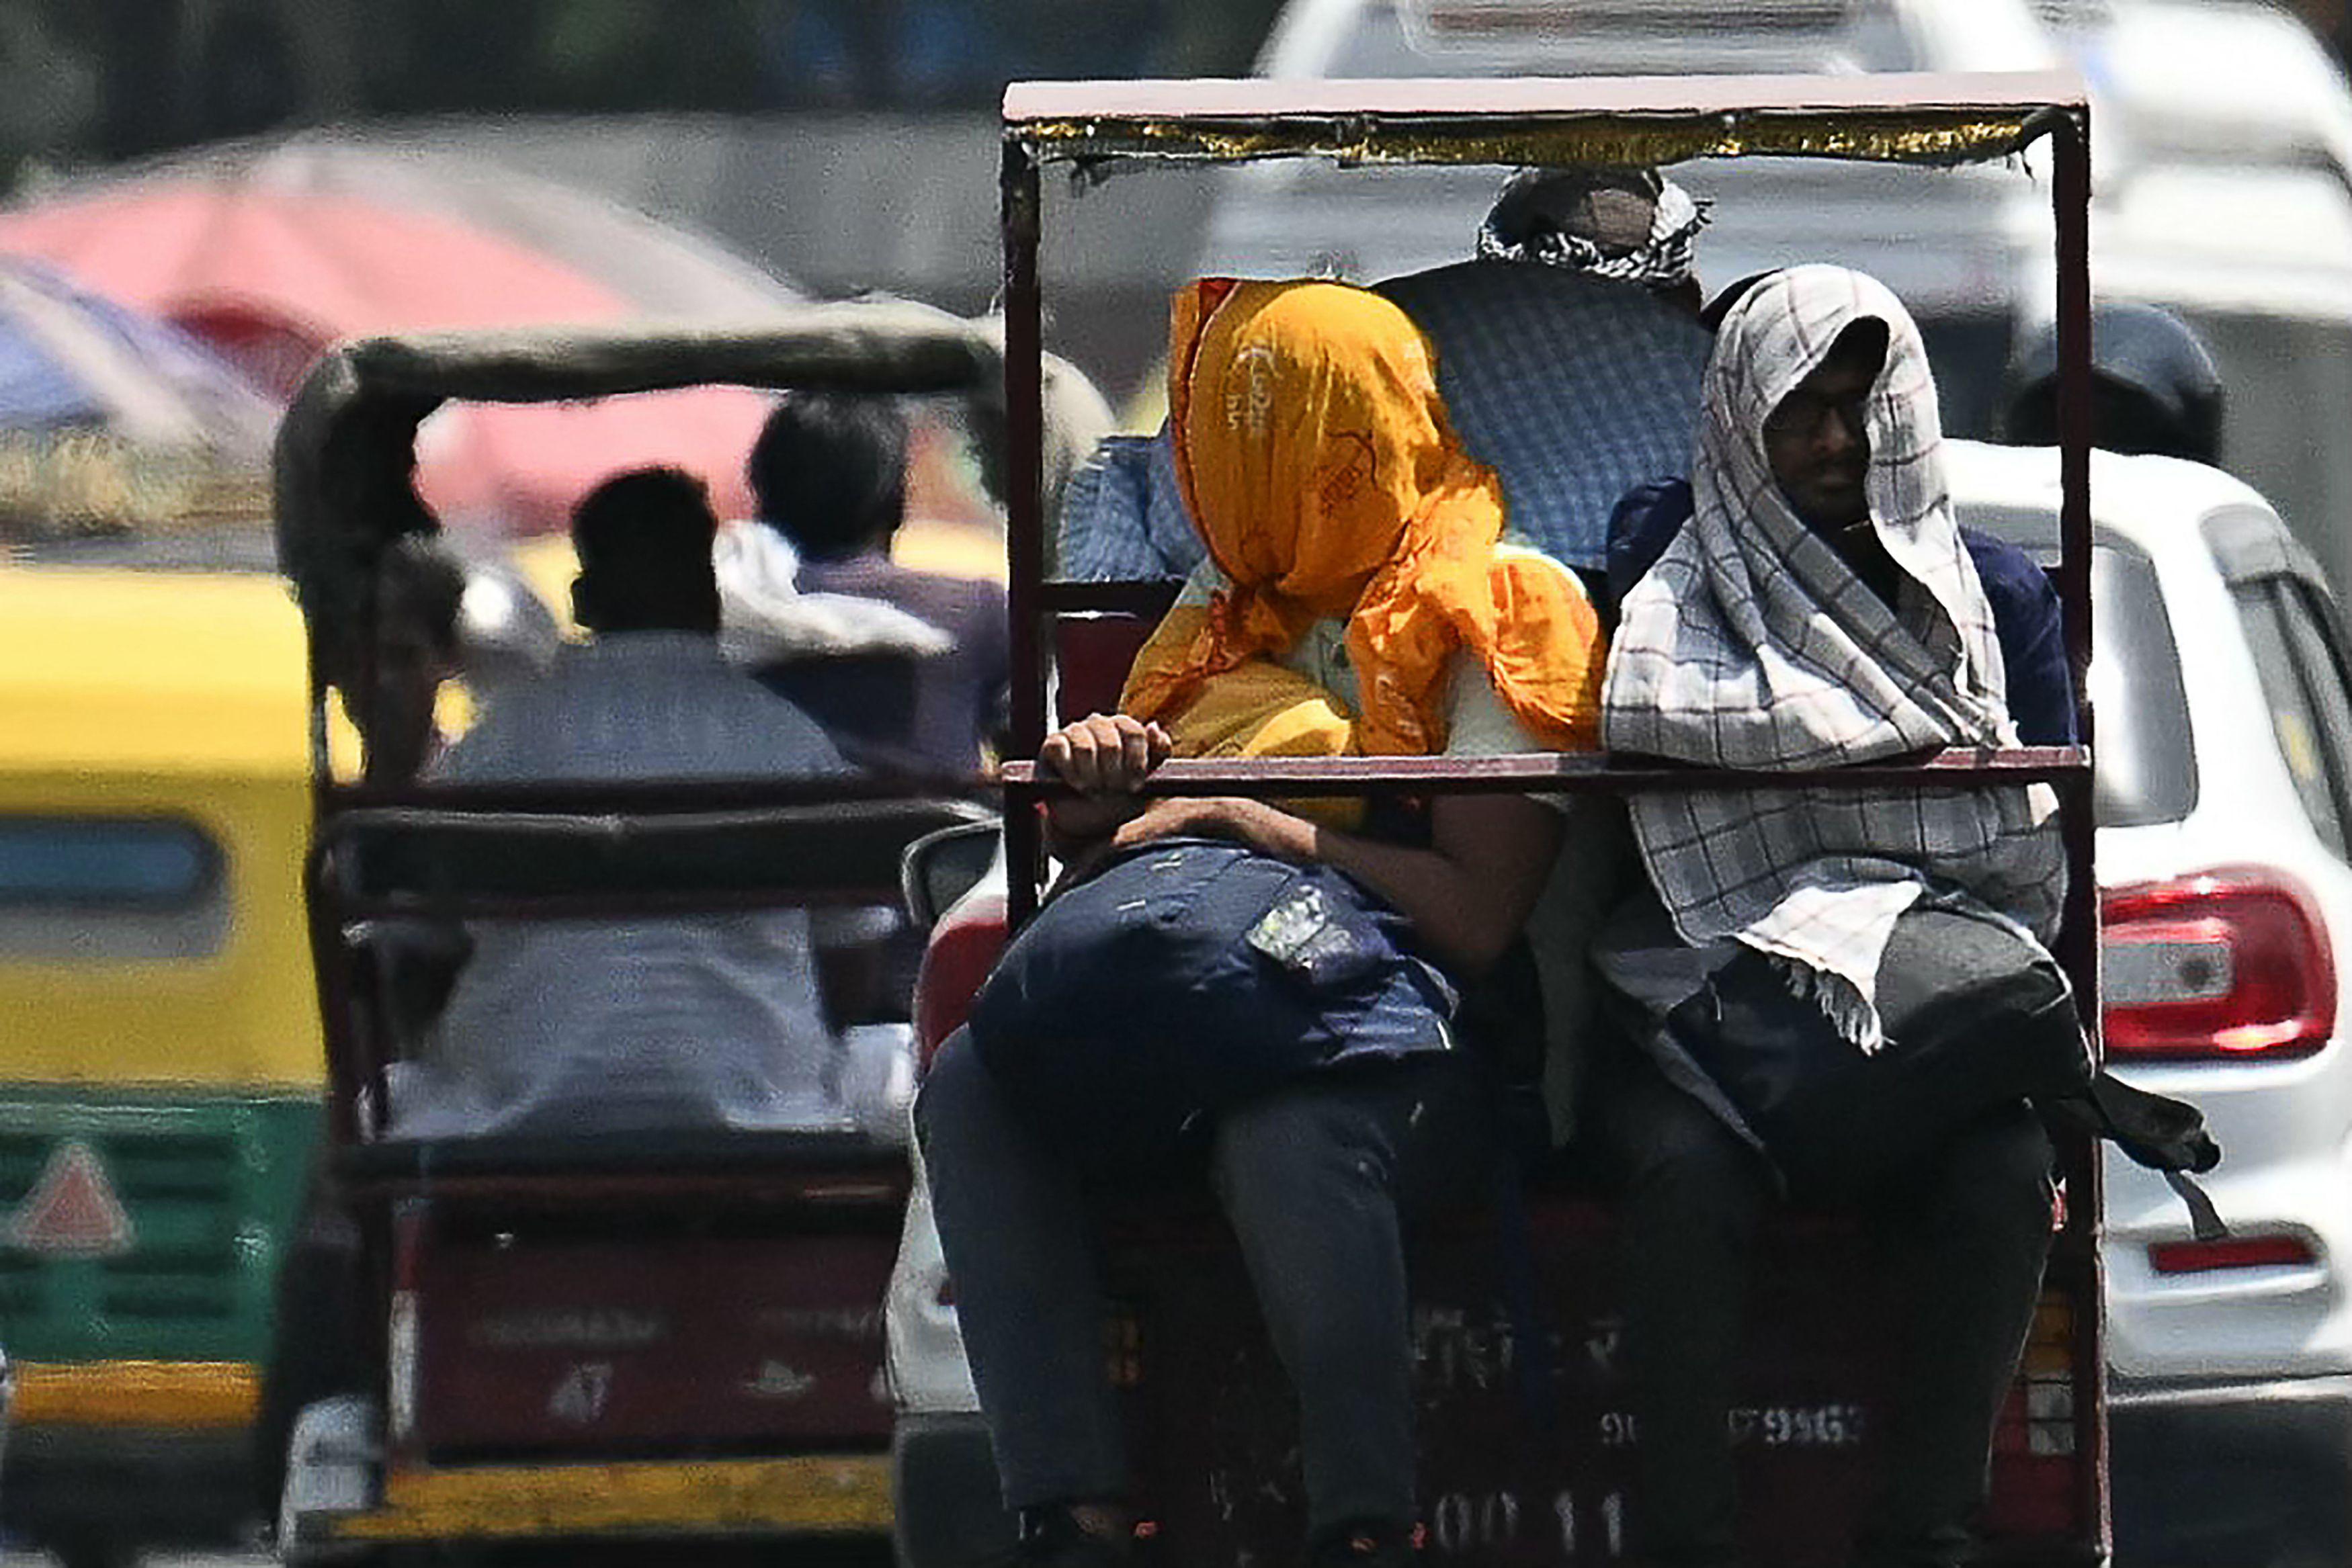 India stifles from the sweltering heat, capital city of New Delhi reaches scorching temperatures of 50 degrees